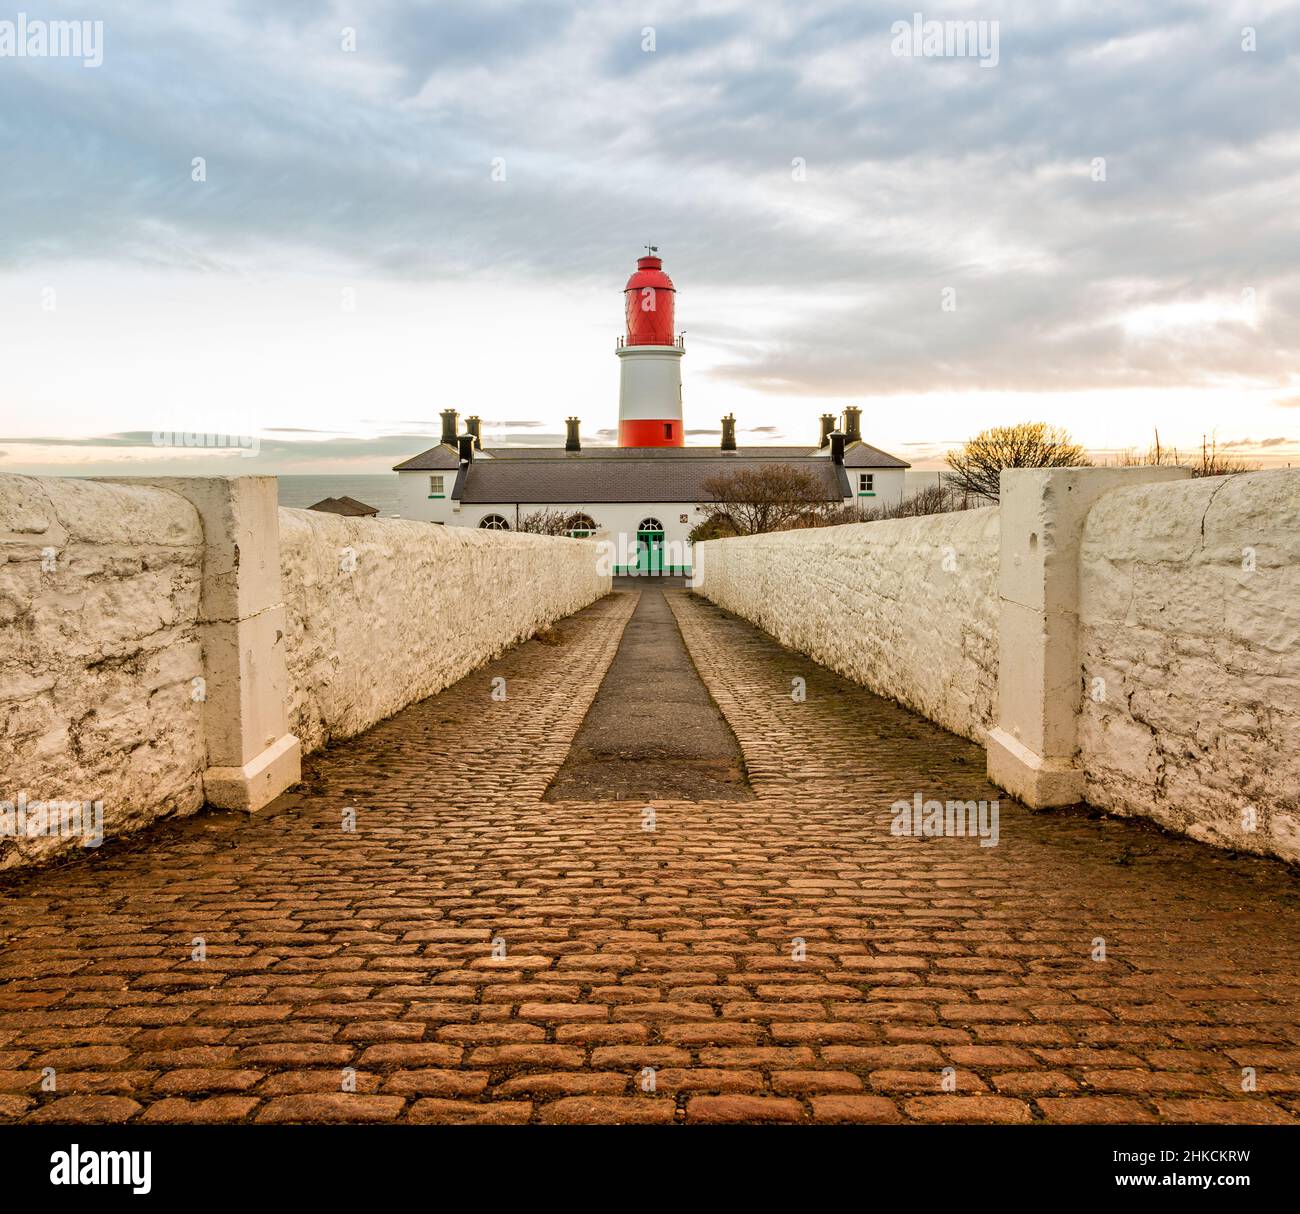 The cobbled pathway to the red and white striped, 23 meter tall,  Souter Lighthouse in Marsden, South Shields as the sun rises Stock Photo